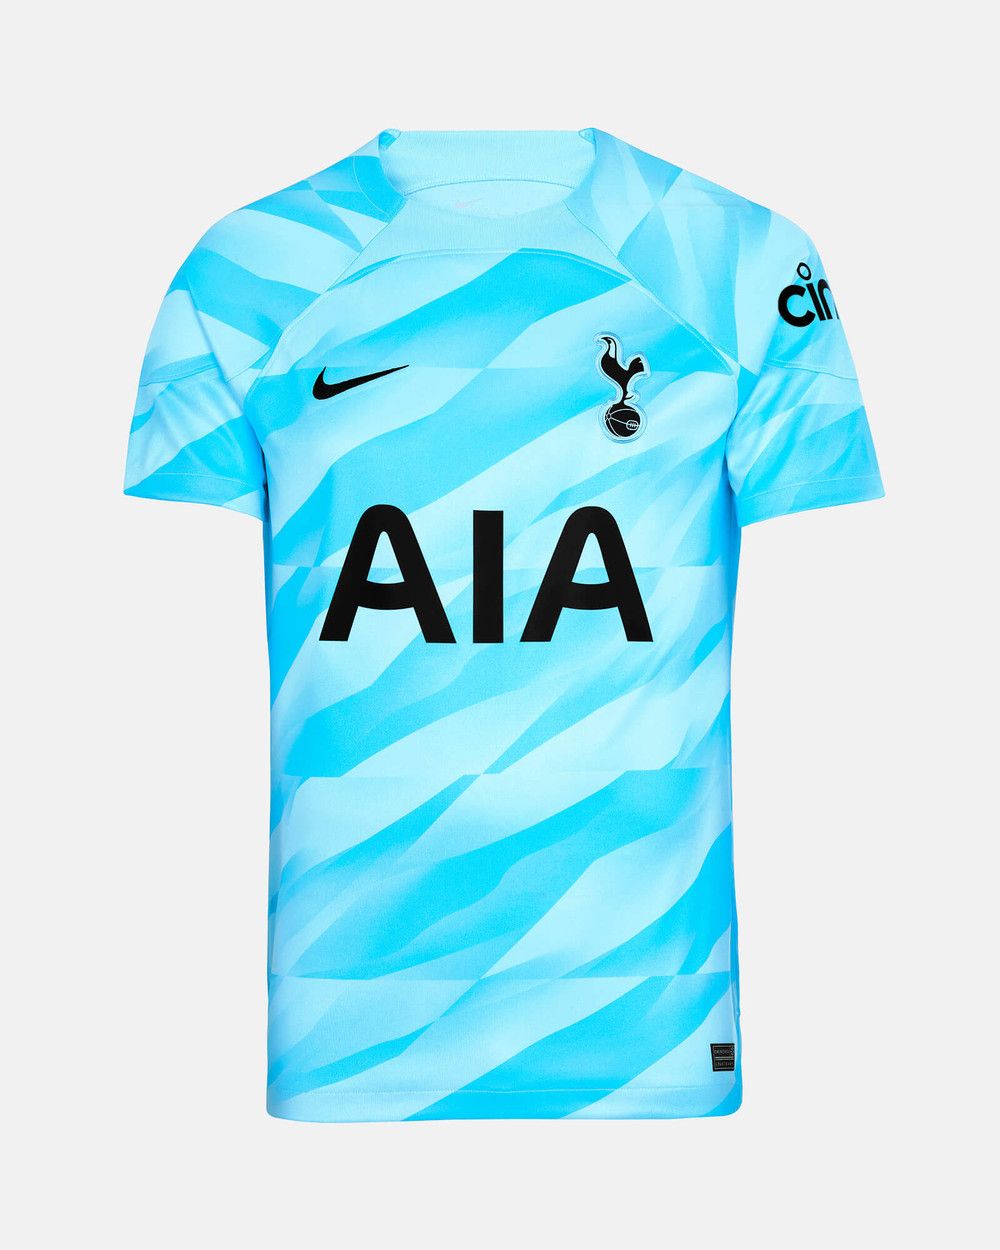 The goalkeeper kit, light blue with a slightly darker blue abstract wave pattern.